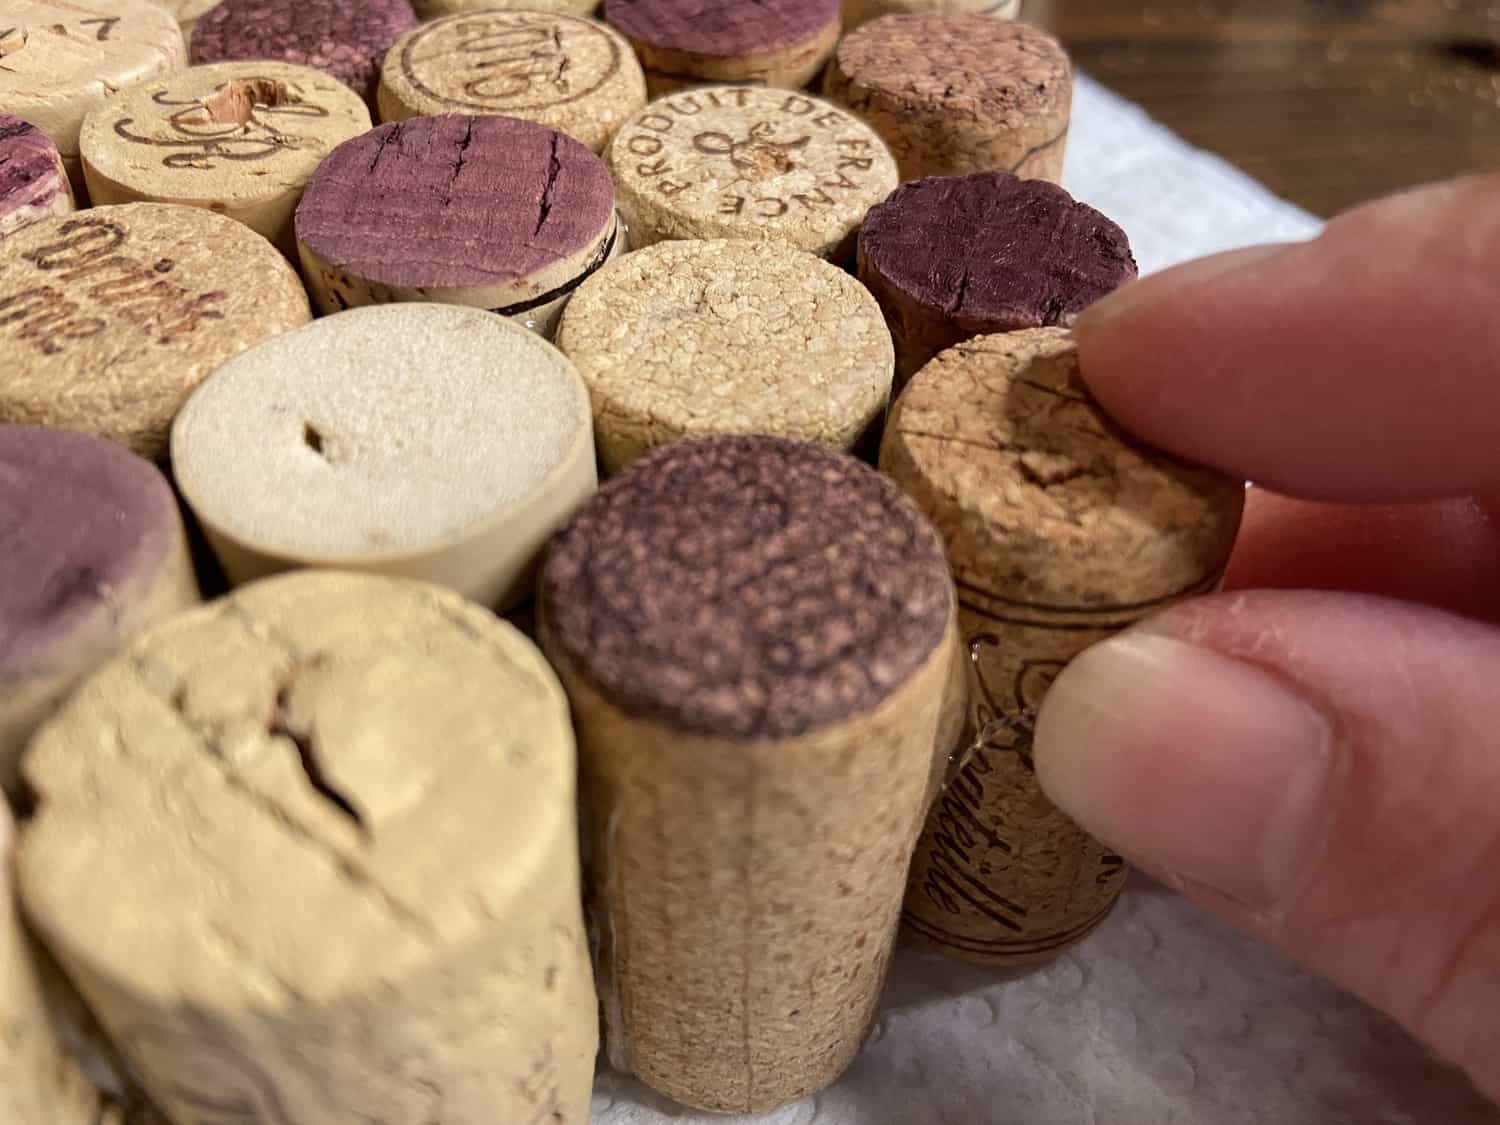 Standing corks on end and gluing them together.